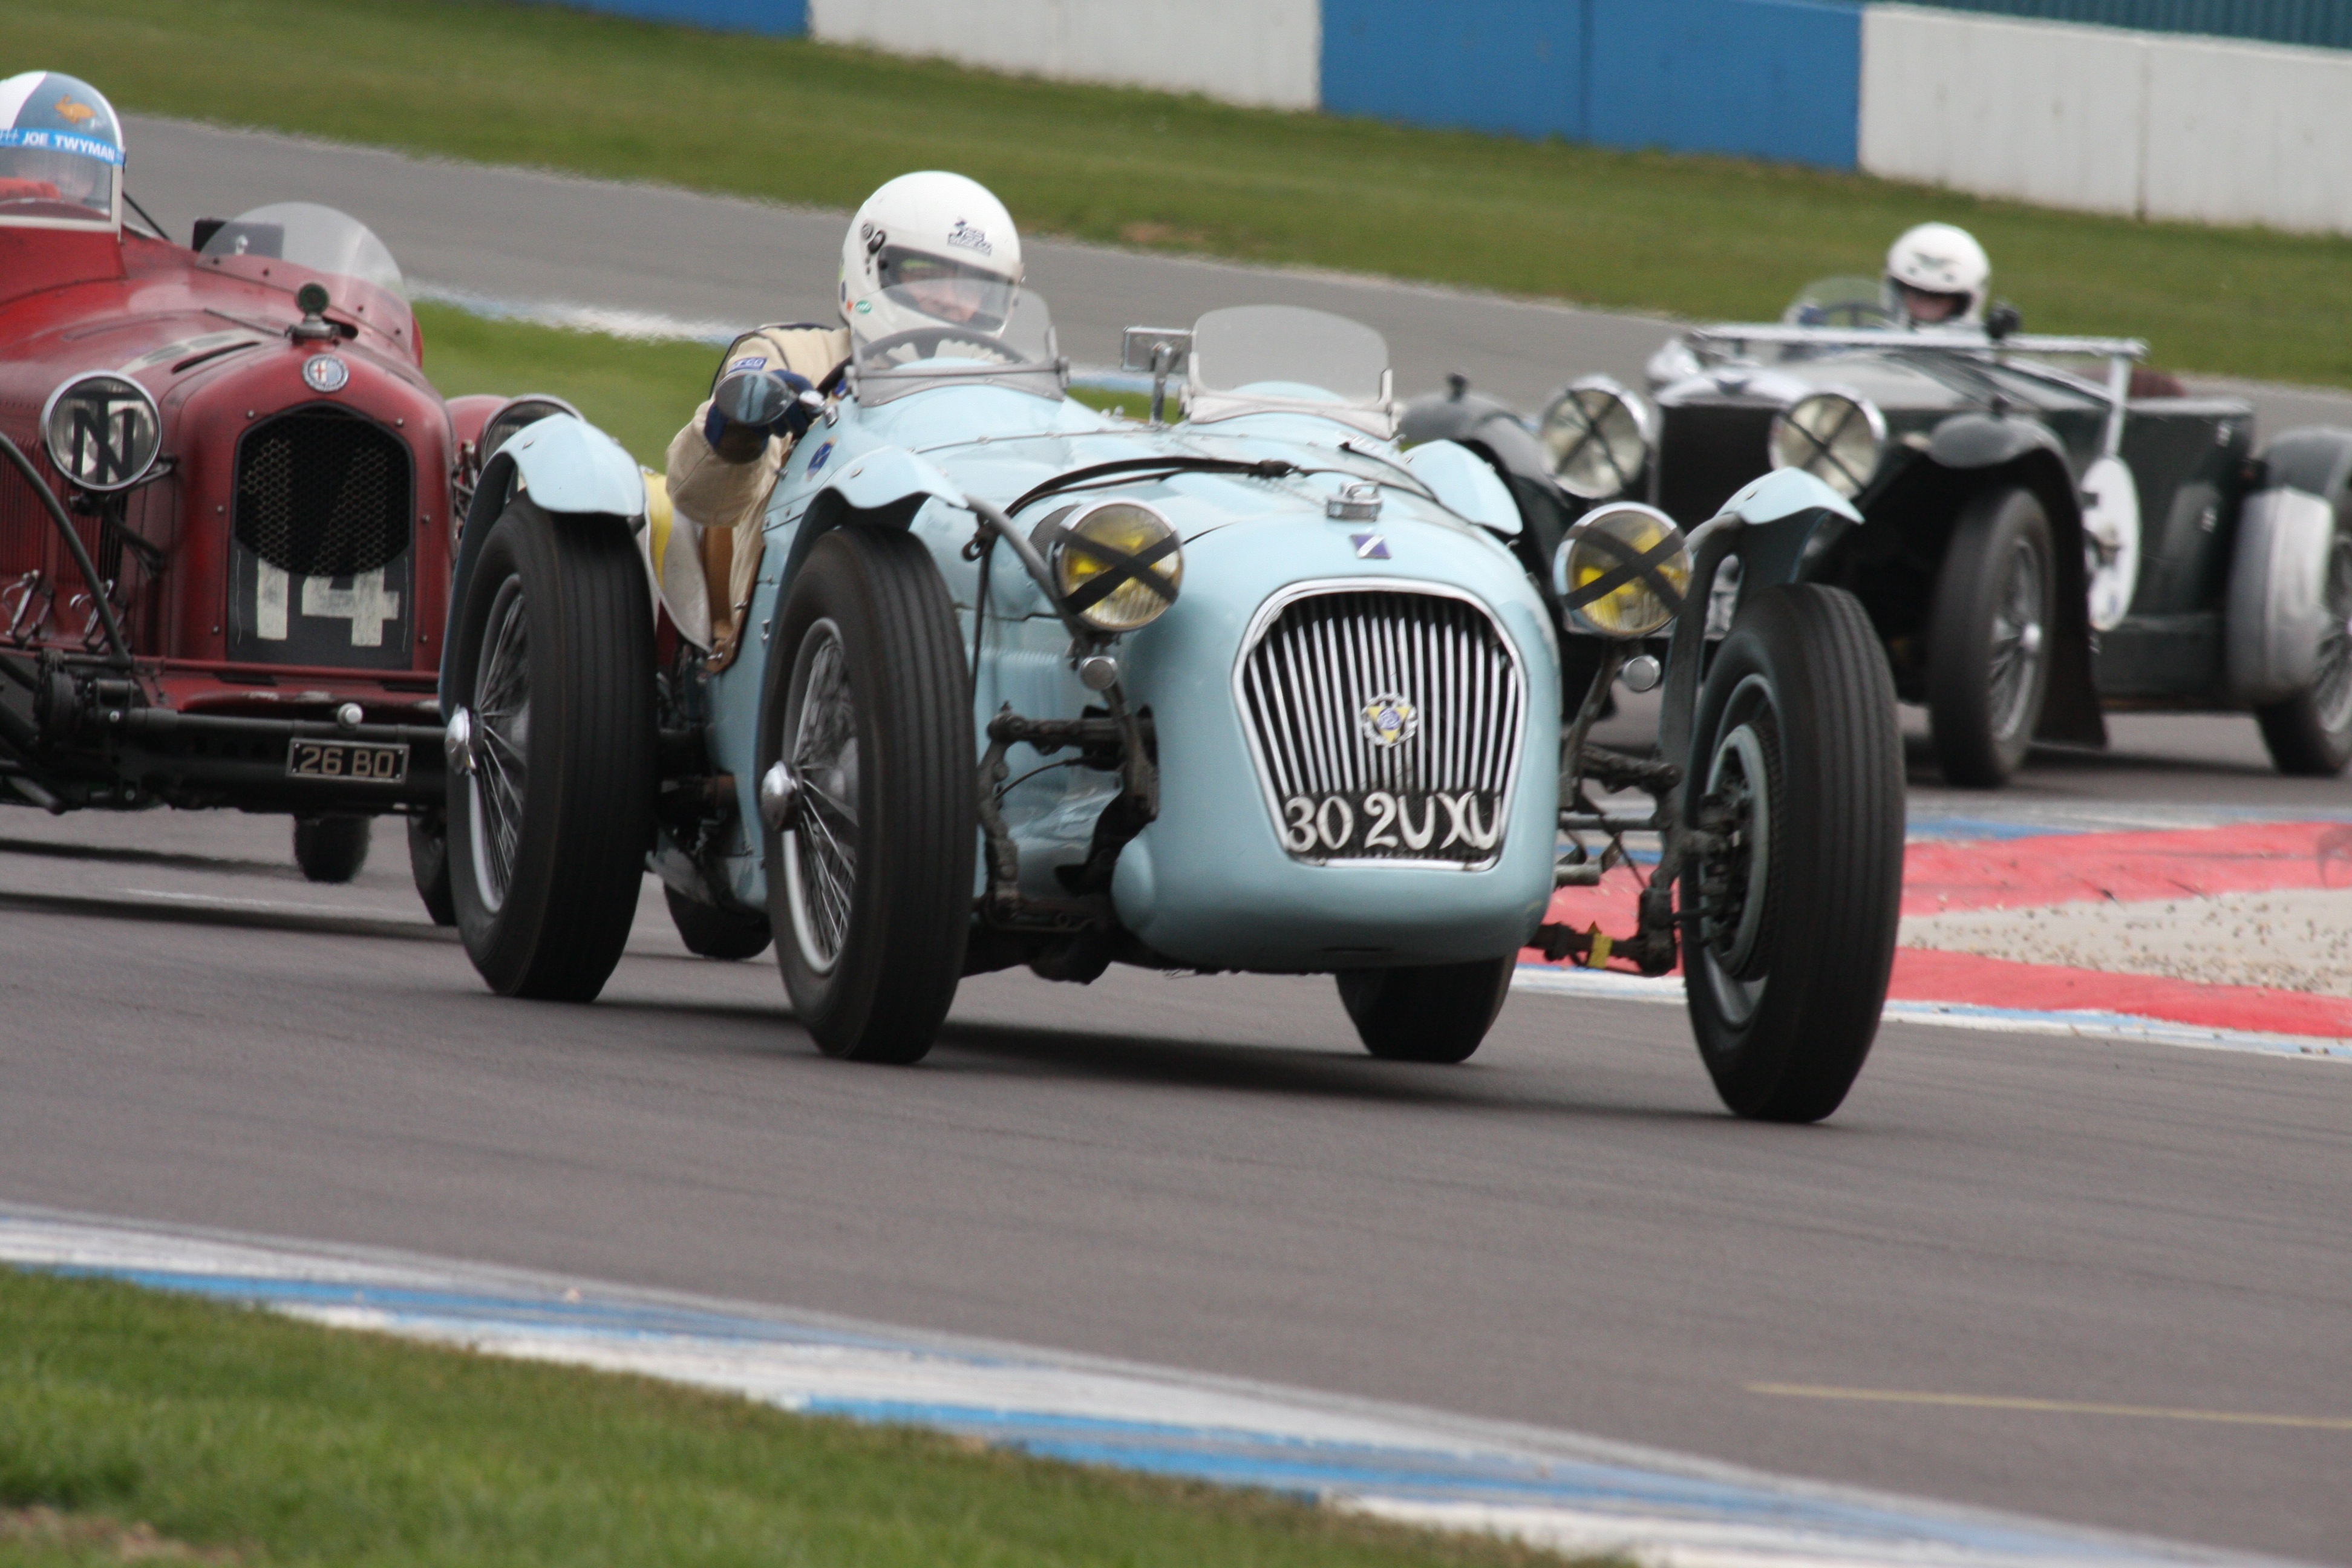 Two major institutions of Pre-war motorsport to reunite this weekend as VSCC return to Donington Park cover